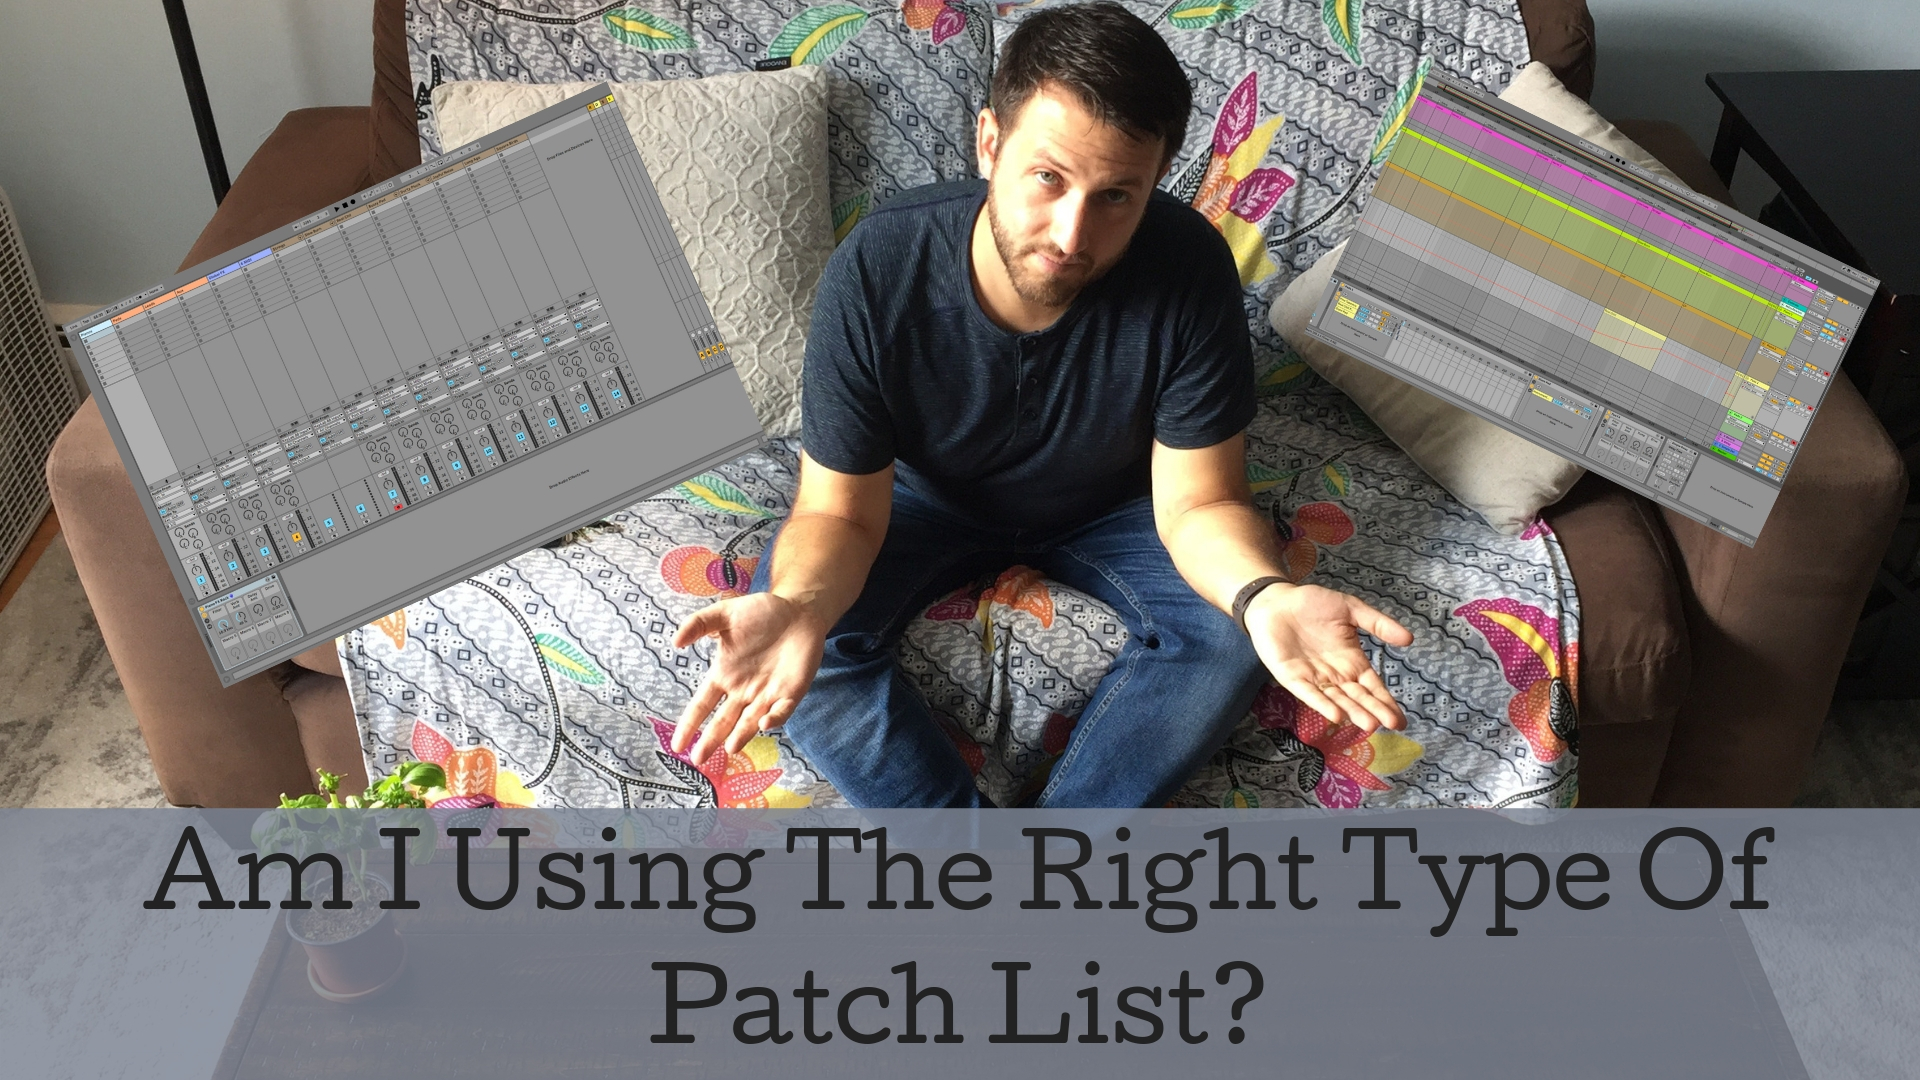 Most Common Types Of Patch Lists